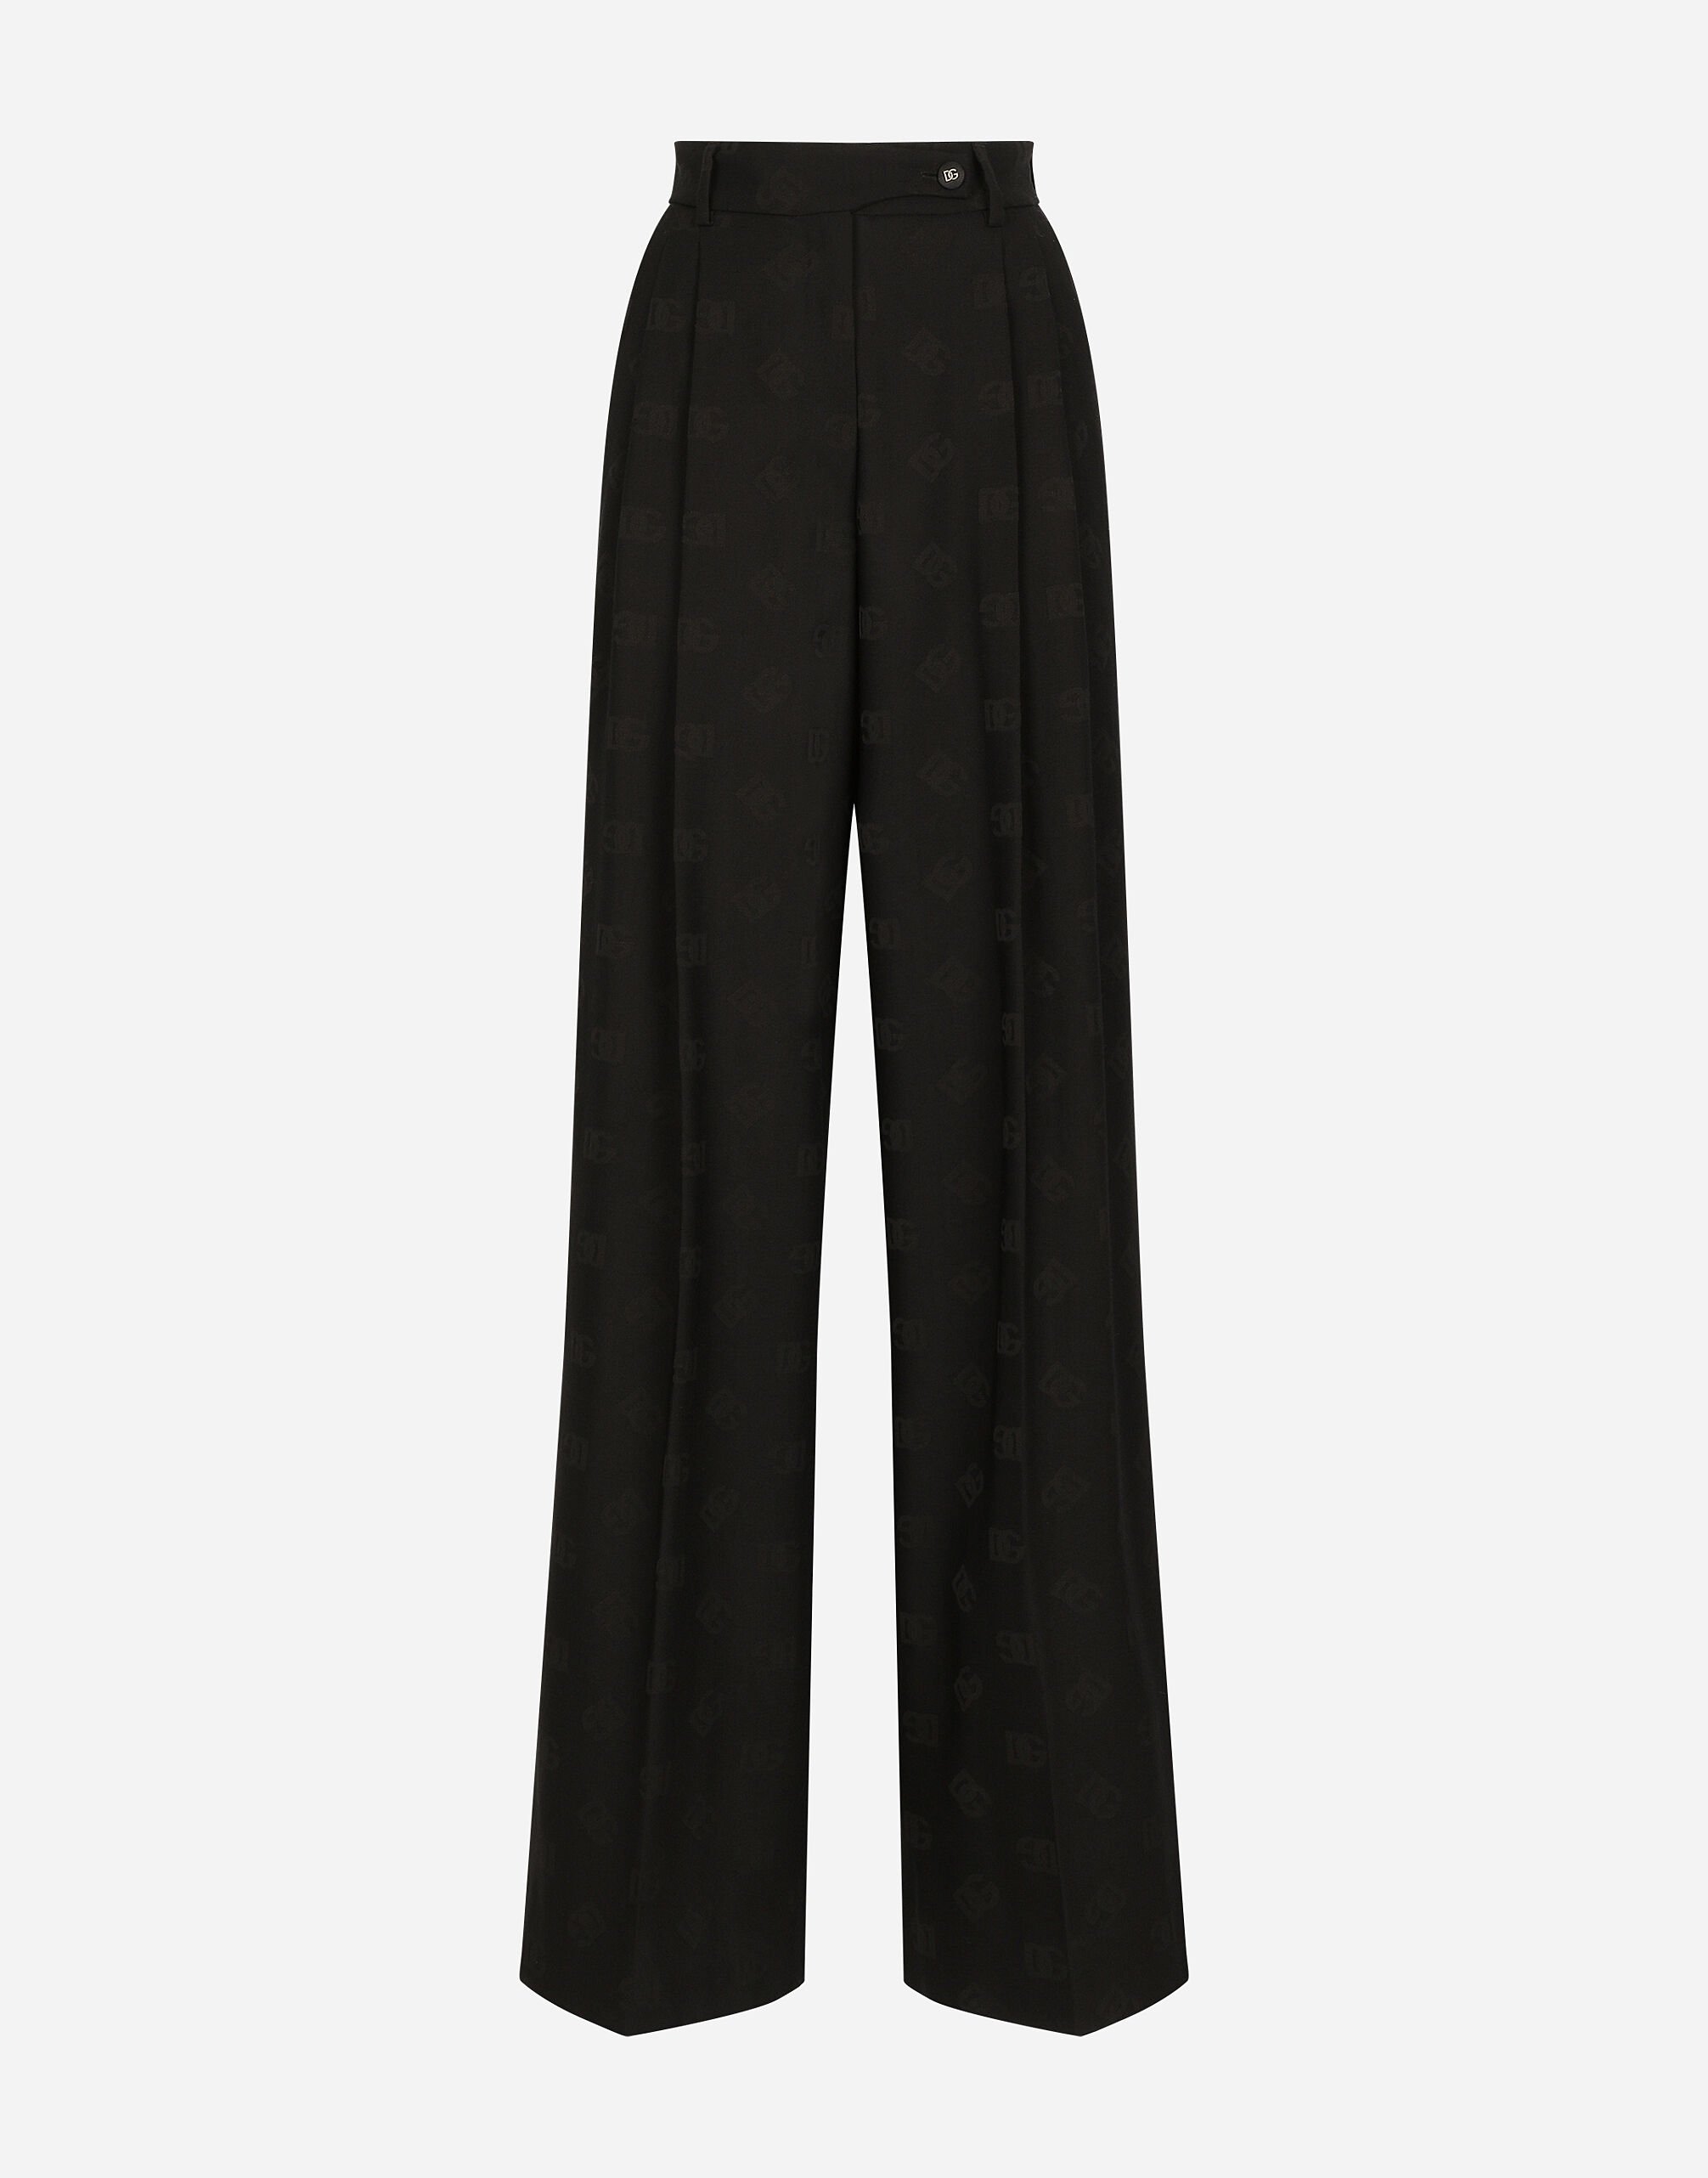 ${brand} Flared wool jacquard pants with DG logo ${colorDescription} ${masterID}